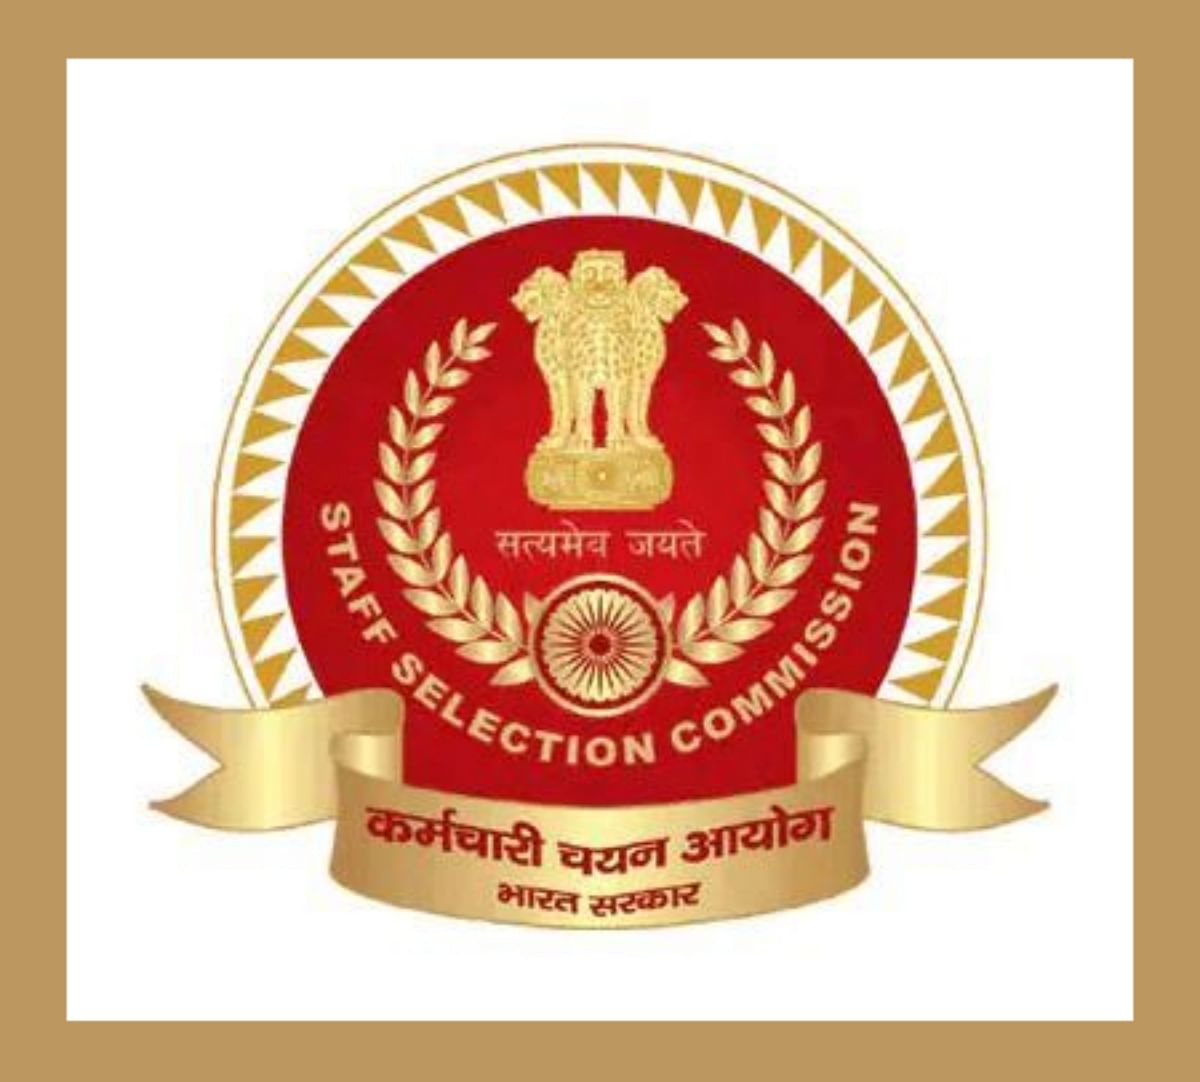 SSC Selection Phase-8 Application Process Concludes Today, Exam To Be Held in June